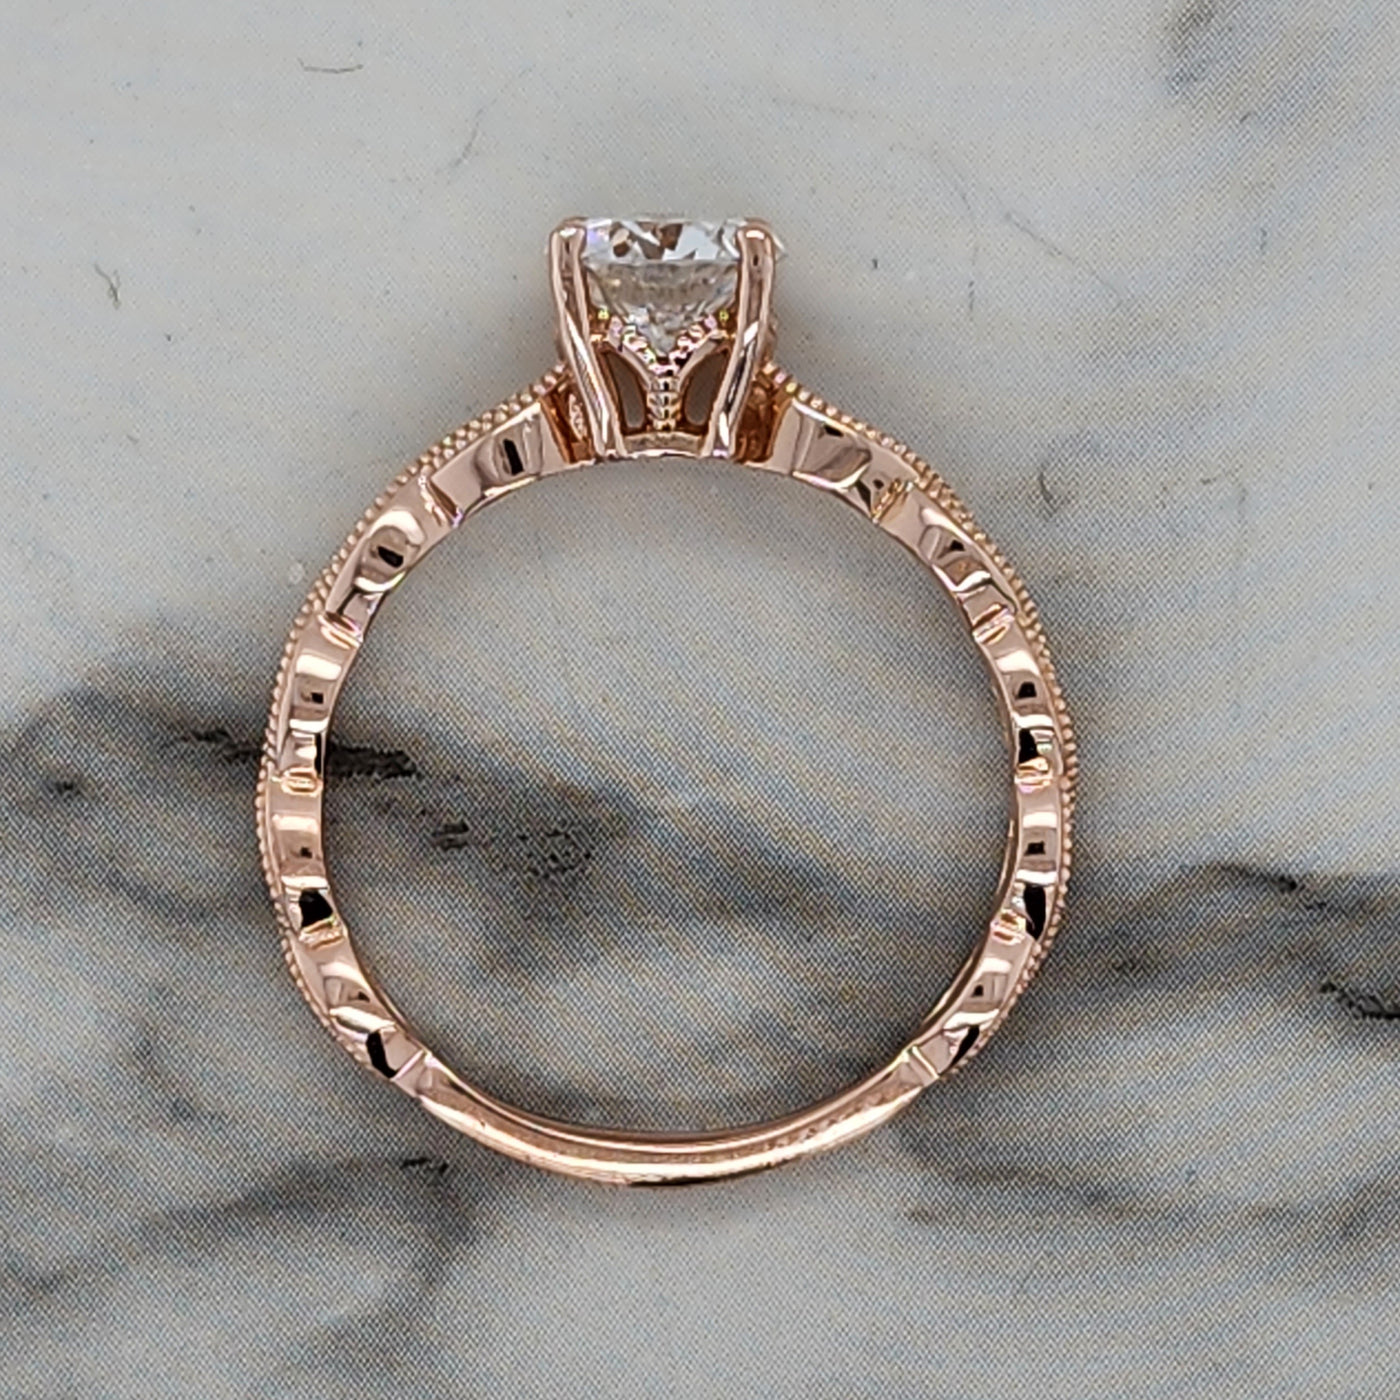 Rose Gold Round Engagement Ring With Milgrain Detail and Diamond Accents